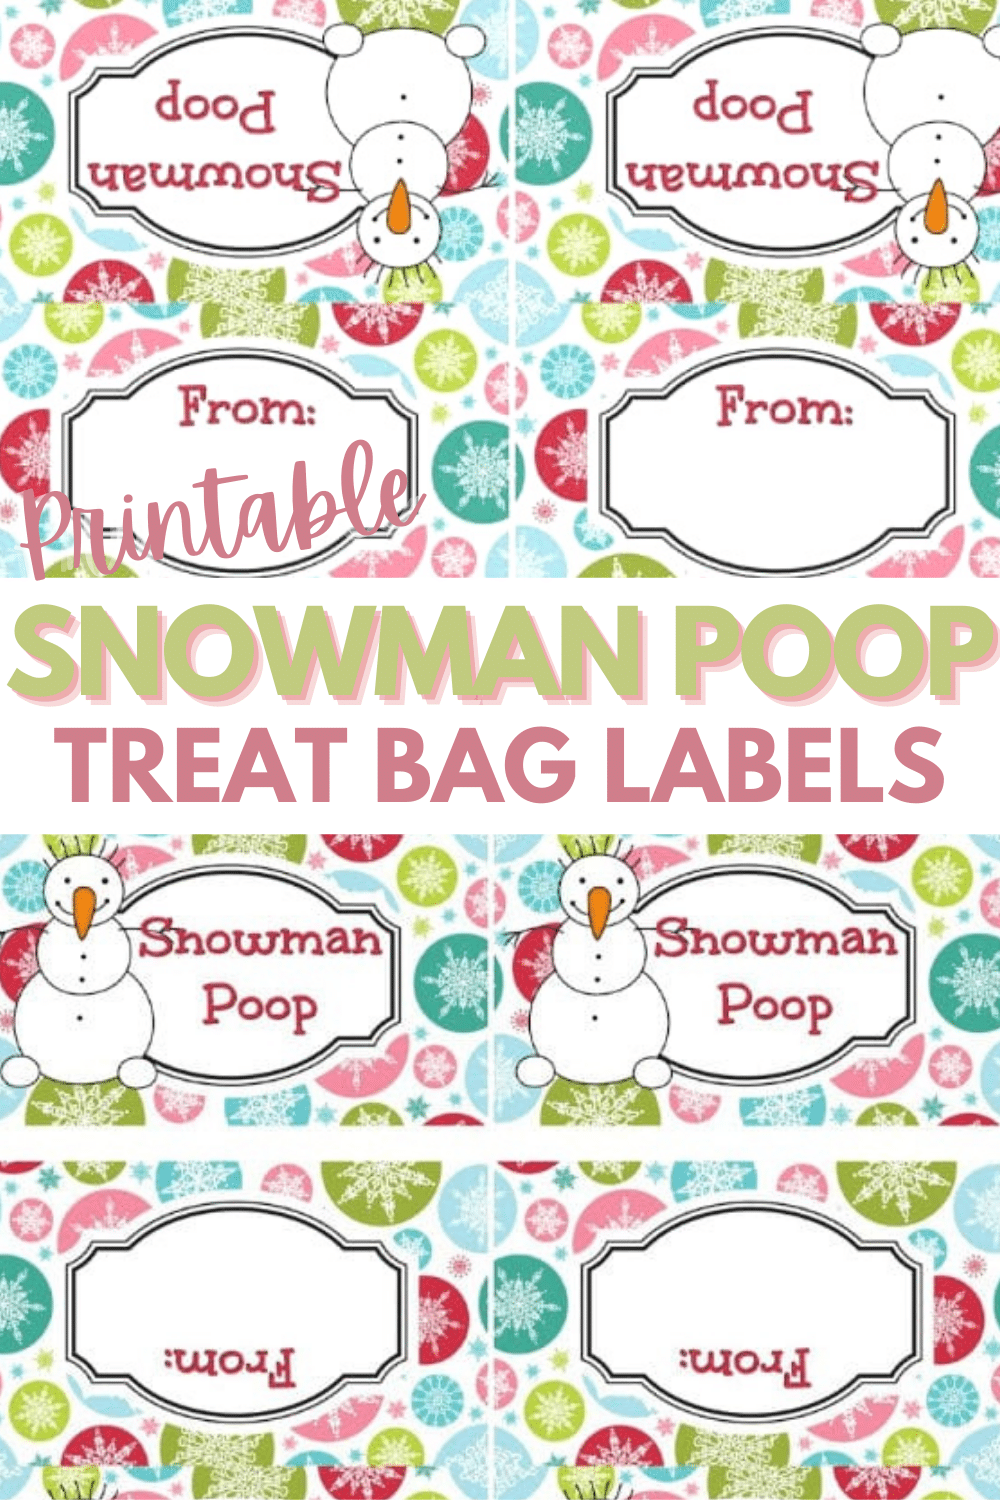 These printable Snowman Poop Treat Bag Labels are adorable and the treat bags take no time to make. Everyone loves getting a snowman poop treat bag. #treatbags #printables #snowmanpoop via @wondermomwannab